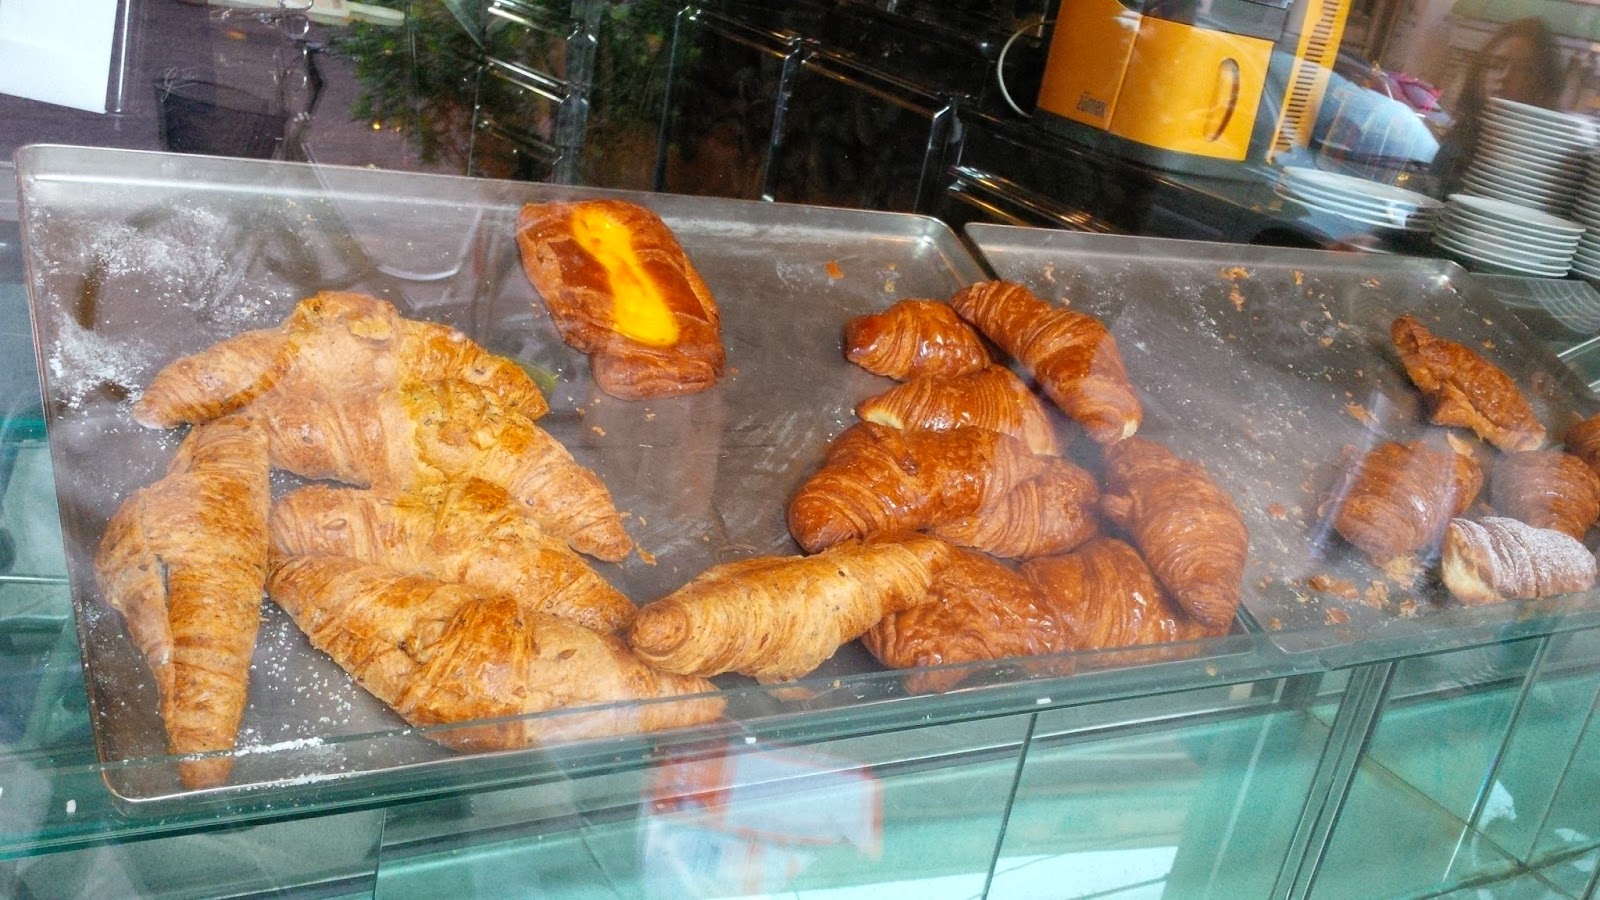 Brioches on metal trays in a snack bar in Vicenza